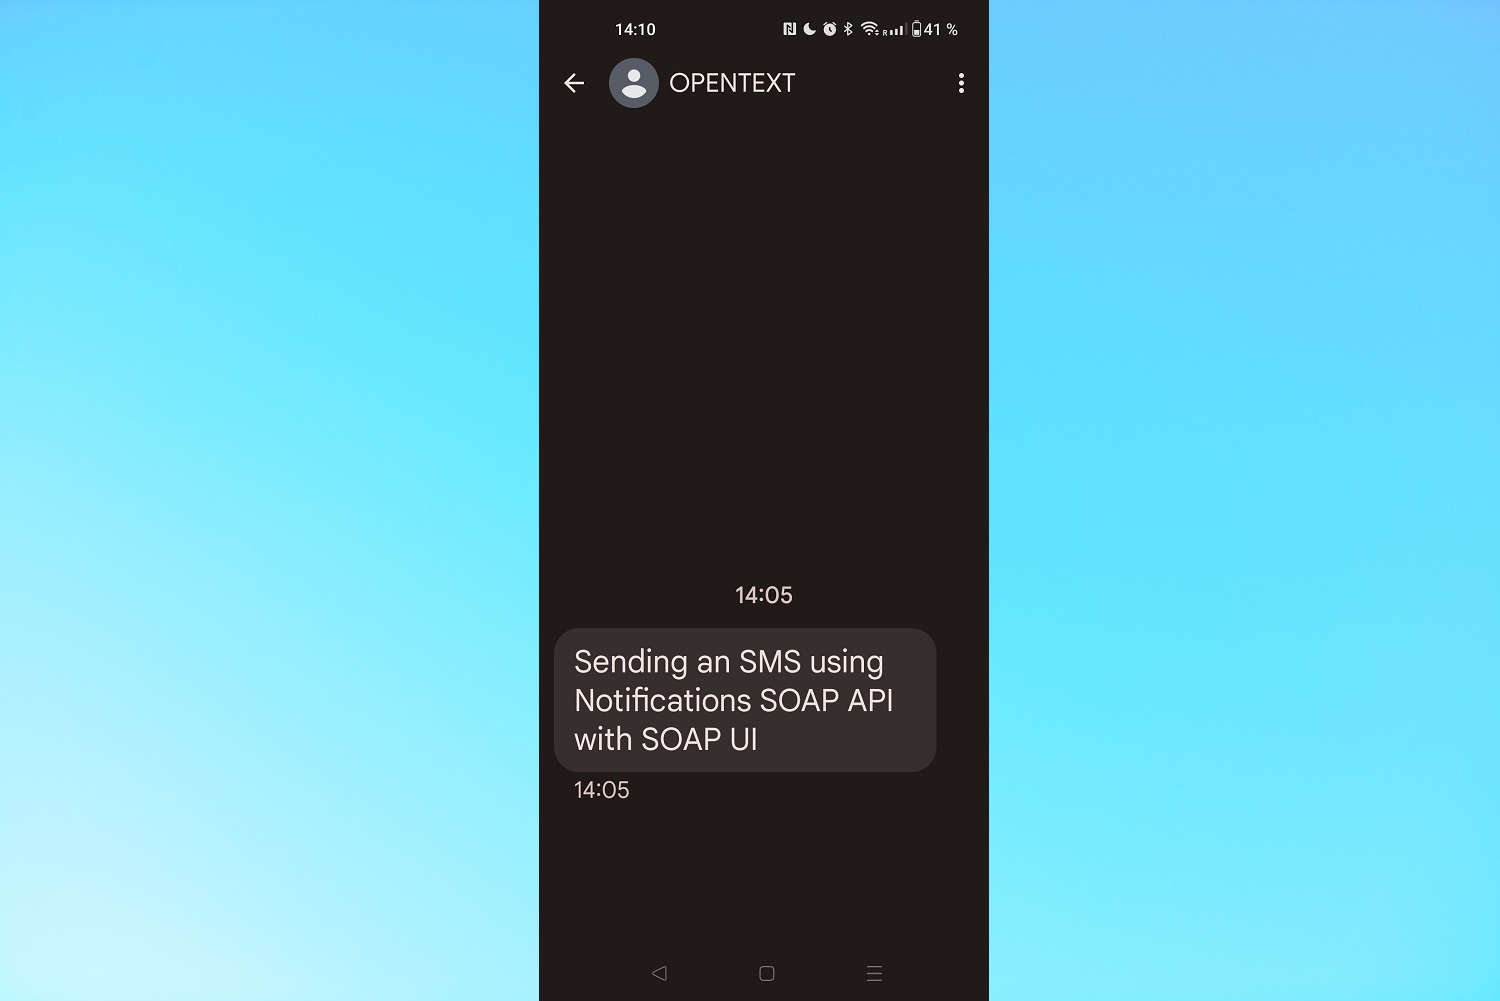 Sending an SMS using Notifications SOAP API with SOAP UI